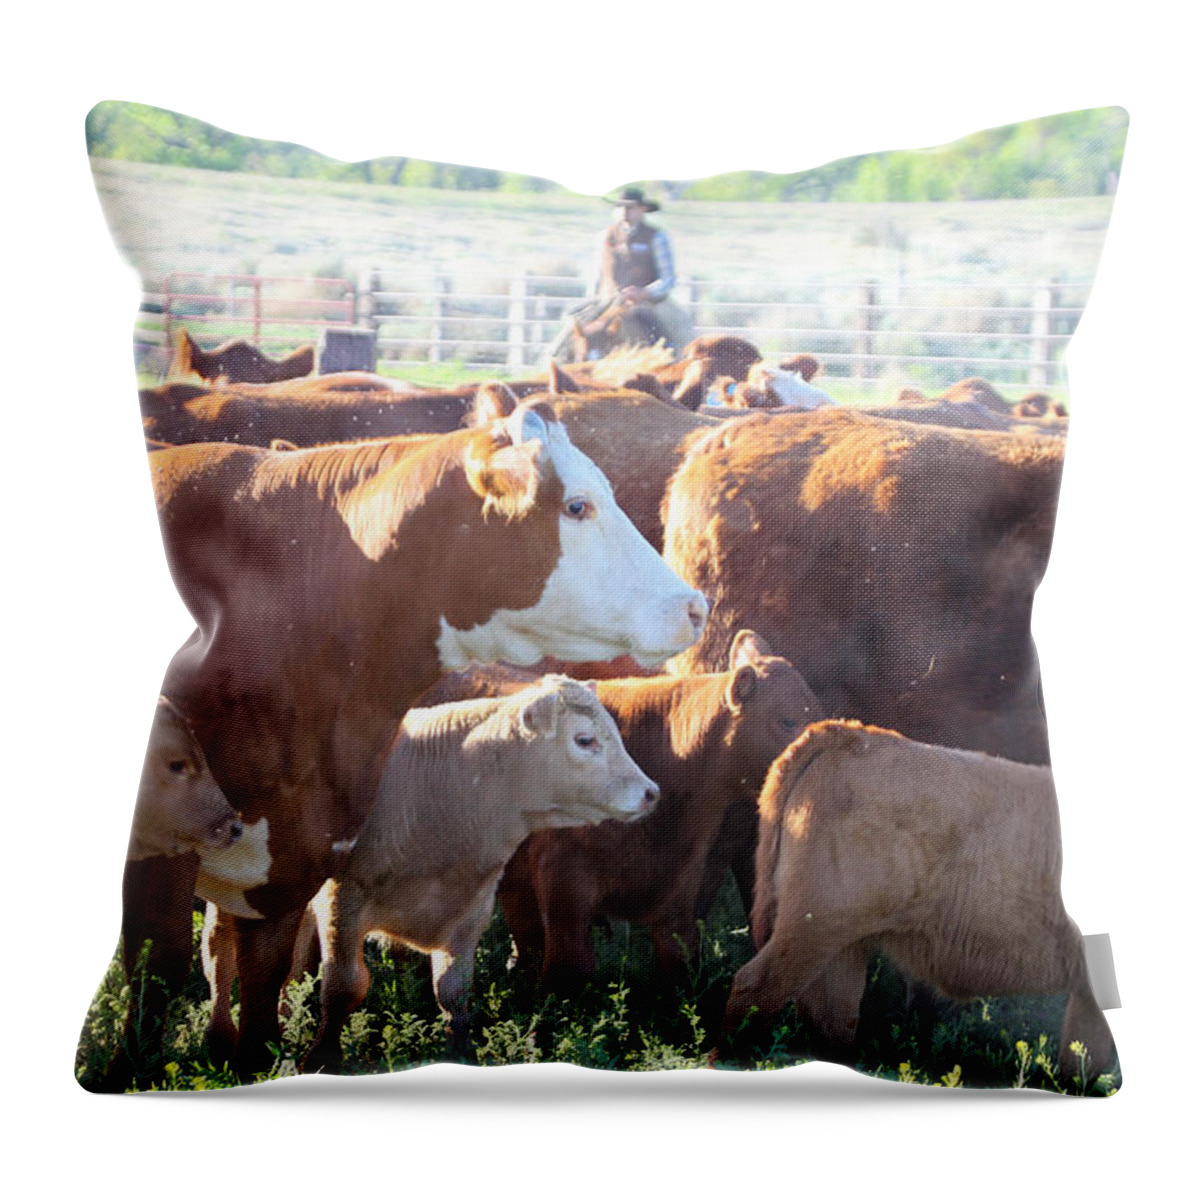 Wyoming 2014 Throw Pillow featuring the photograph Branding Day #1 by Diane Bohna